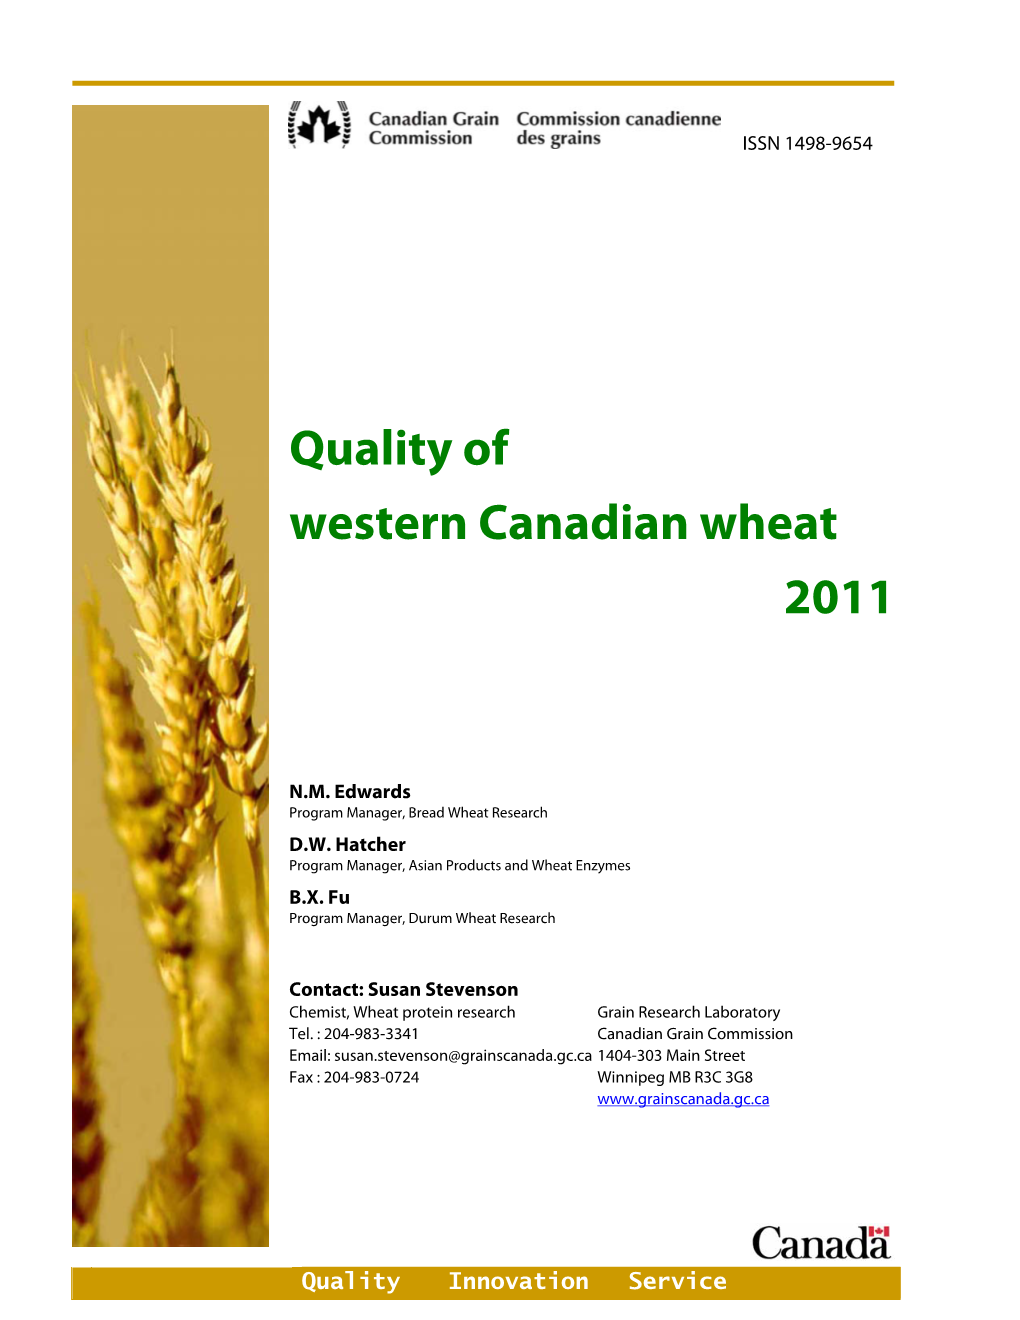 Quality of Western Canadian Wheat 2011